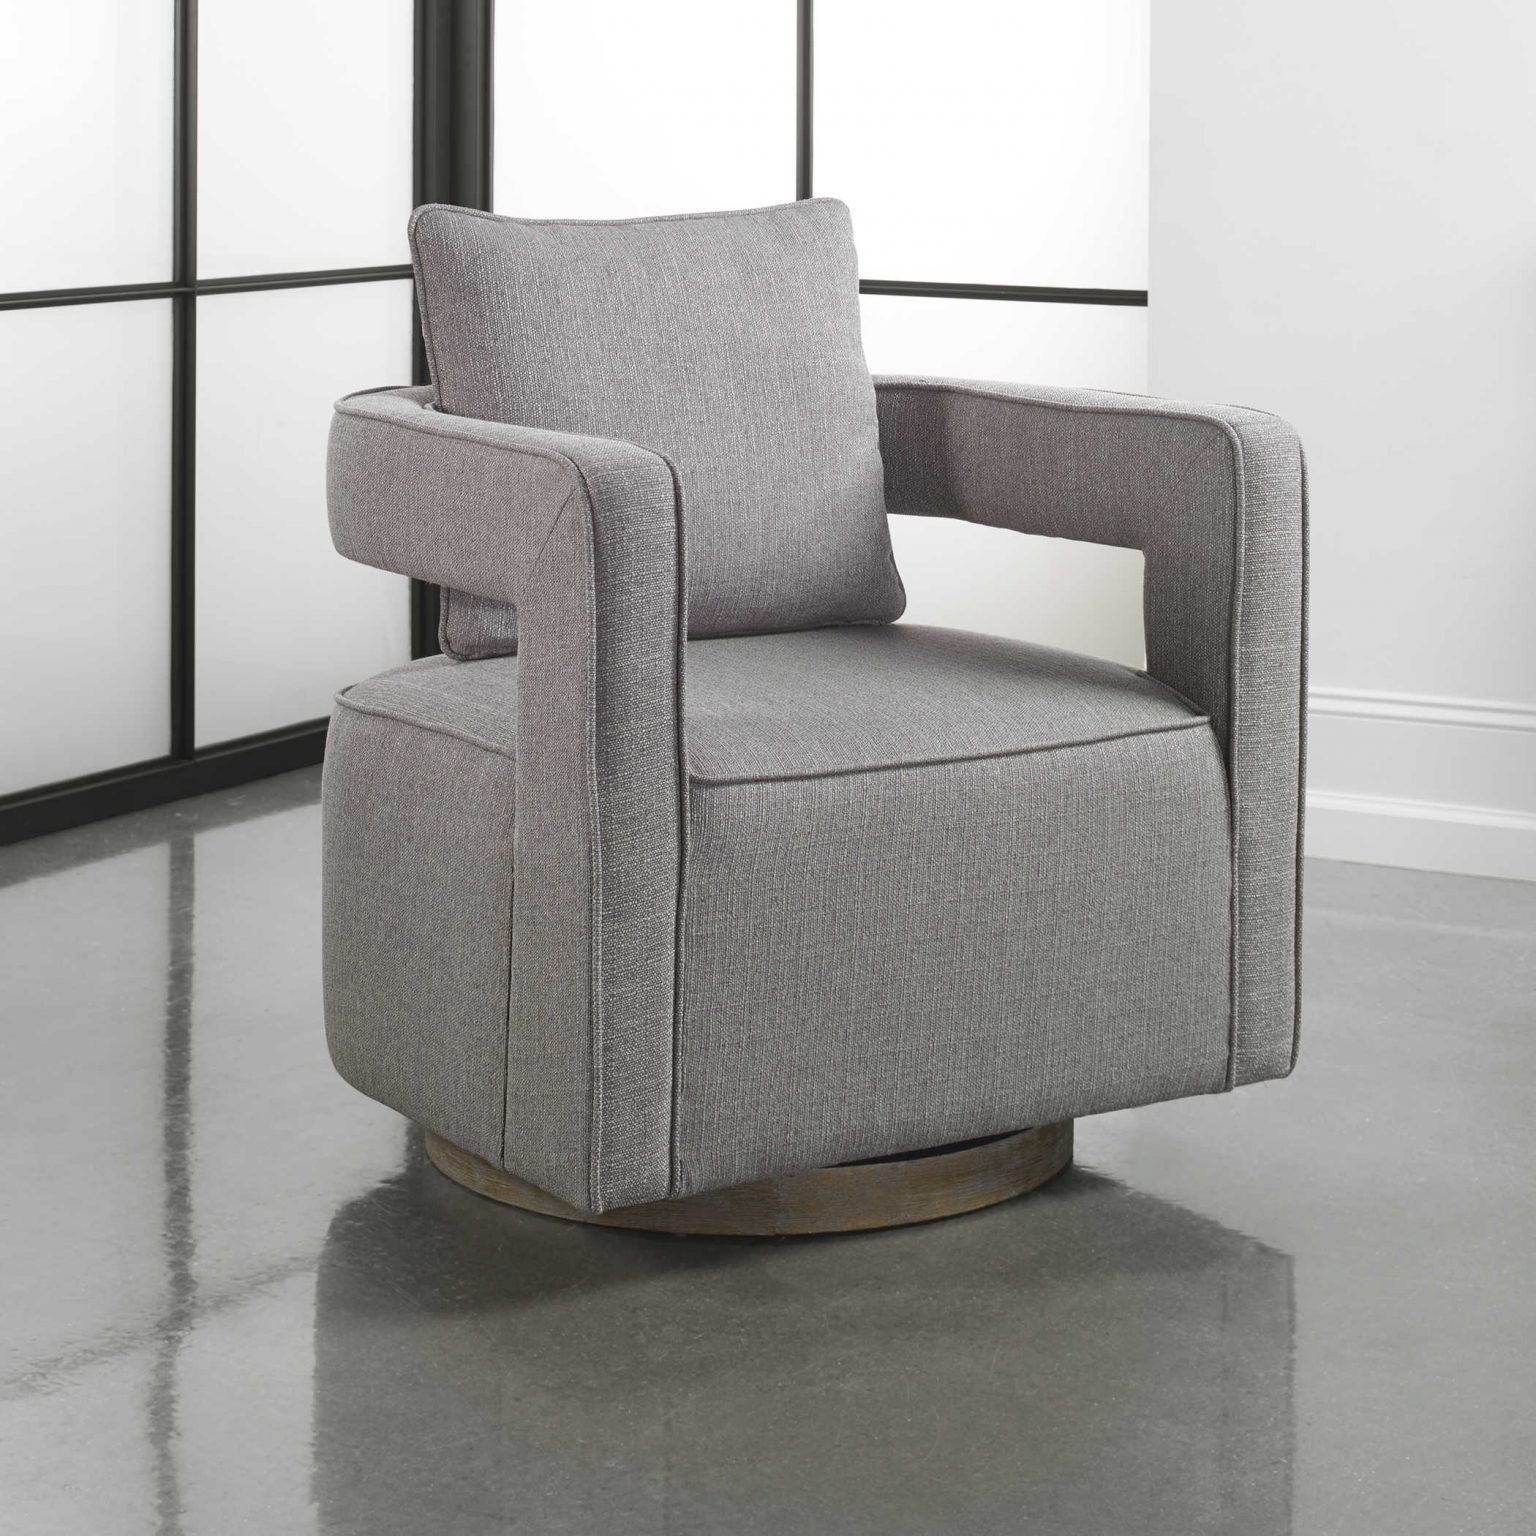 Nostalgic grey swivel chair inspired by the 1970's would look fantastic in a granny chic living room or office